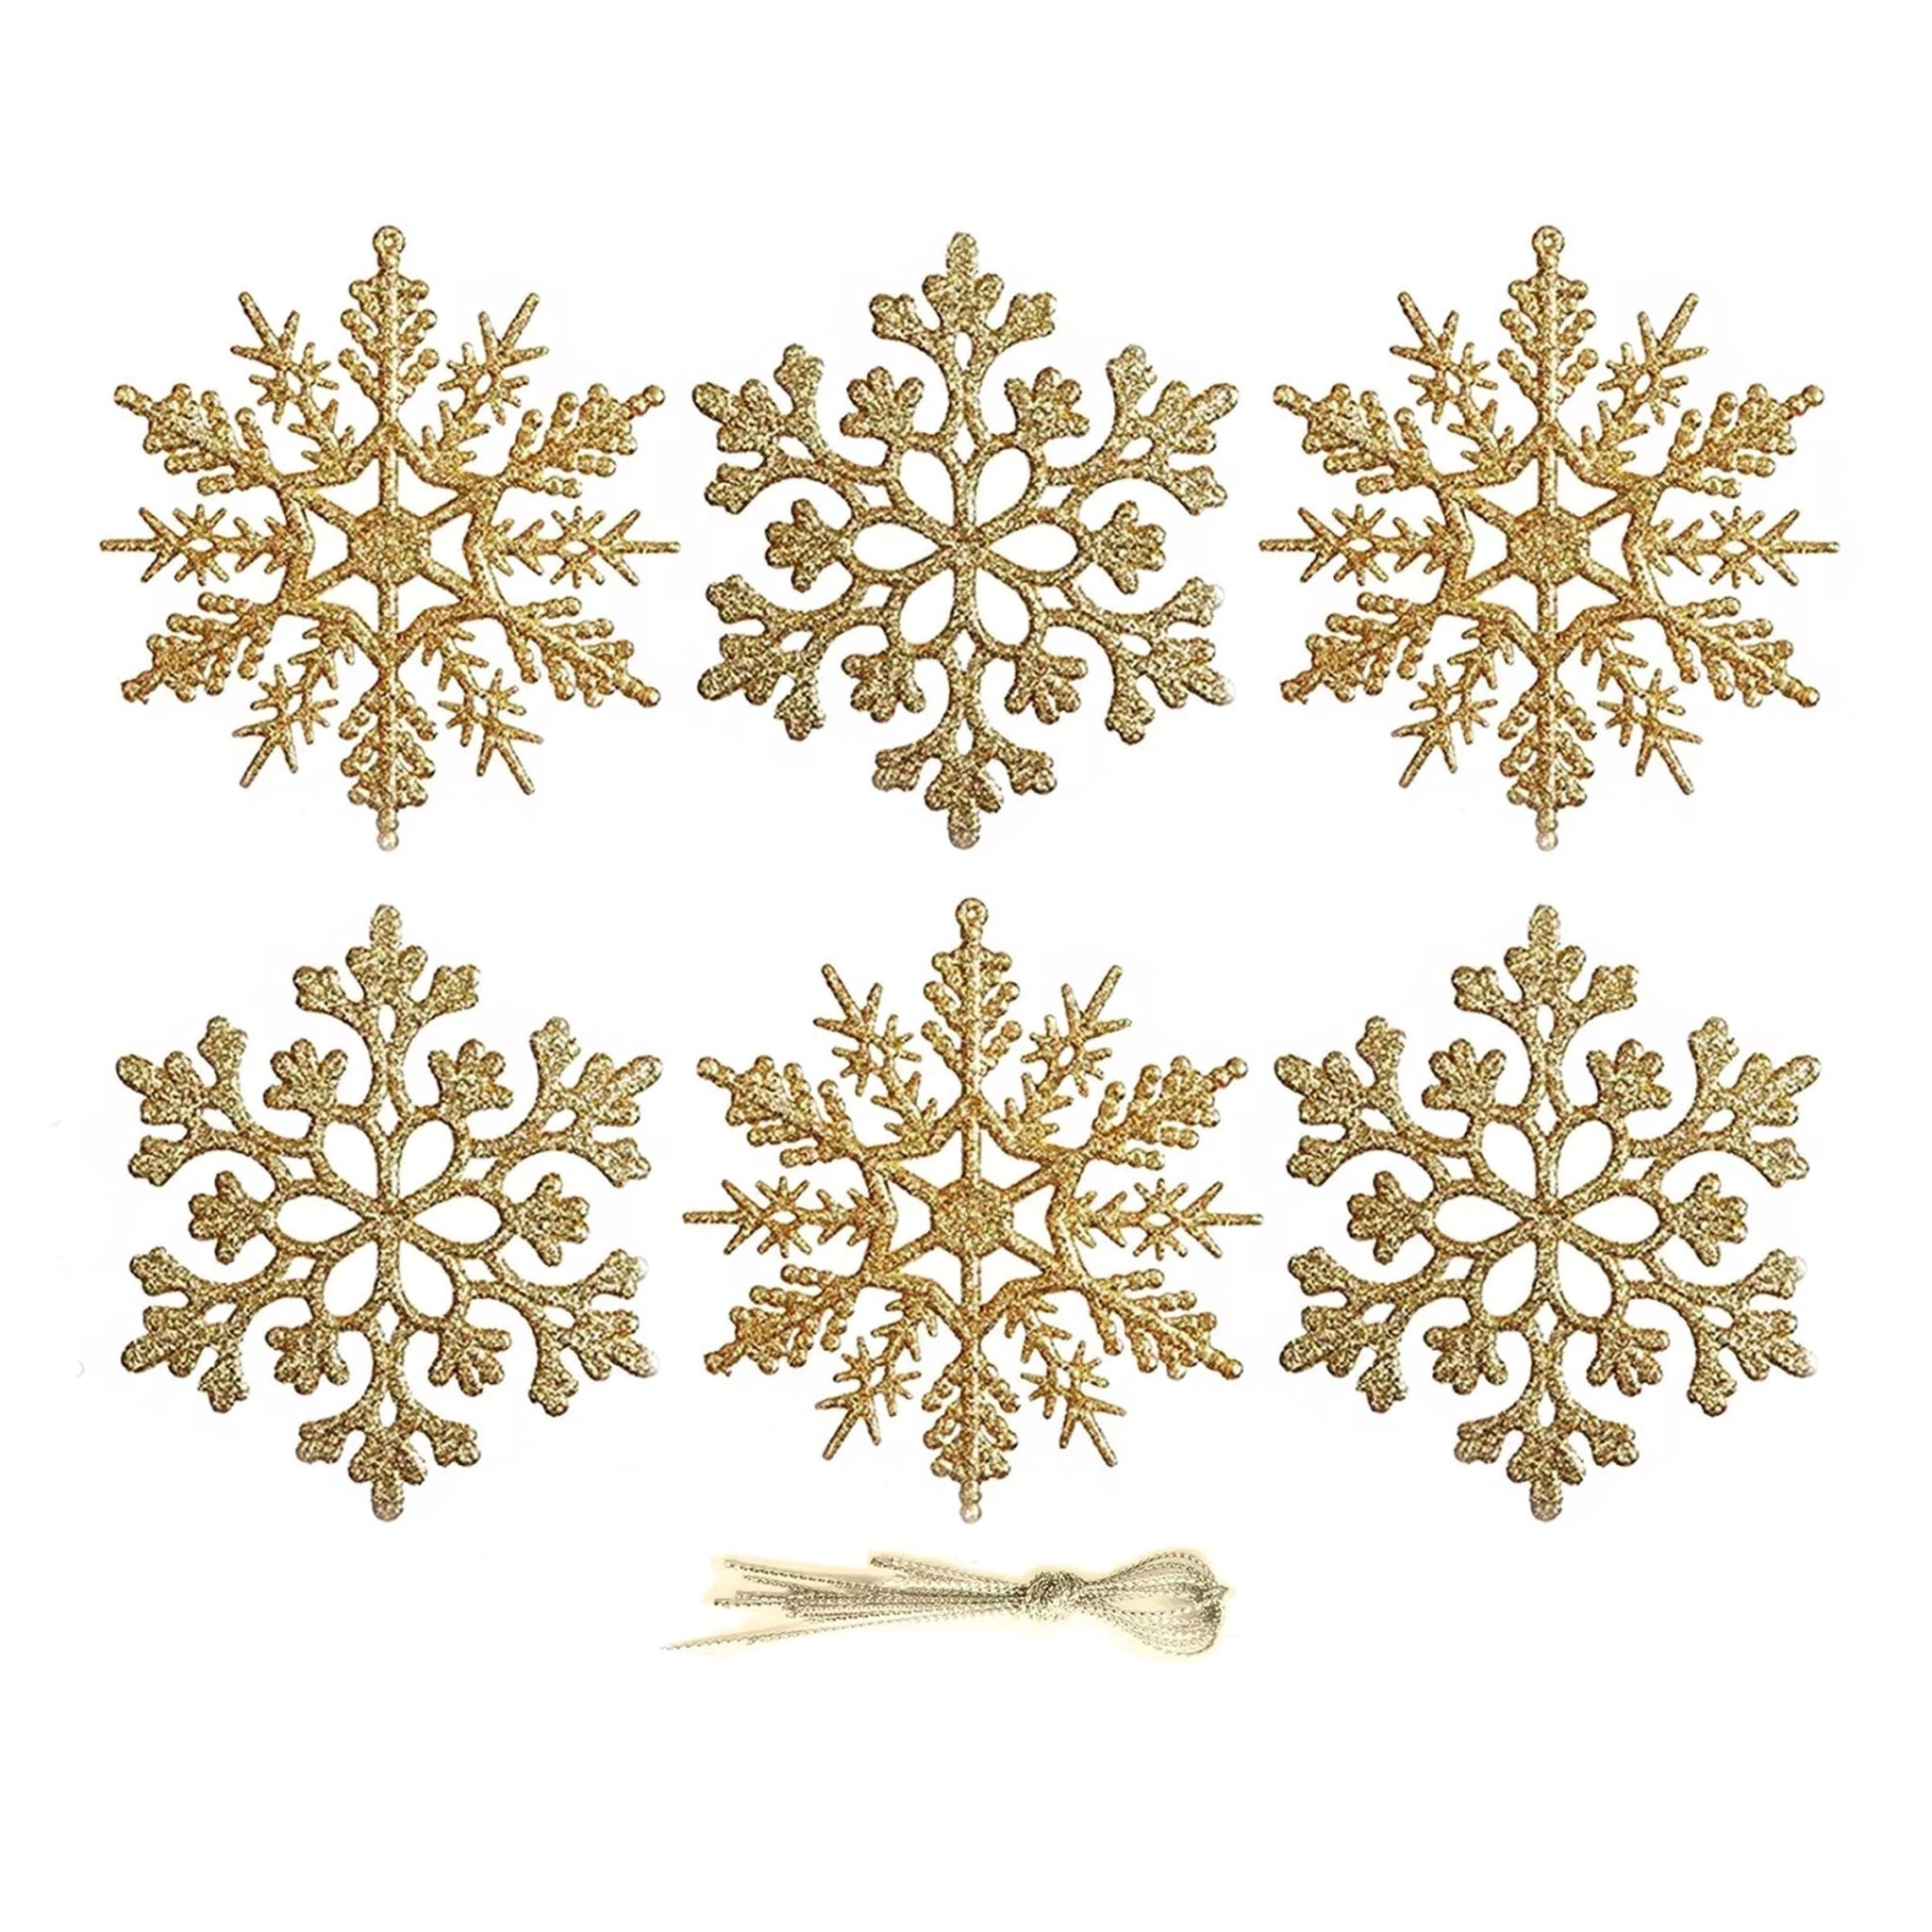 6pcs 10cm Gold Glittered Snowflakes with Hanging Strings 01306 - MODA FLORA Santa's Workshop